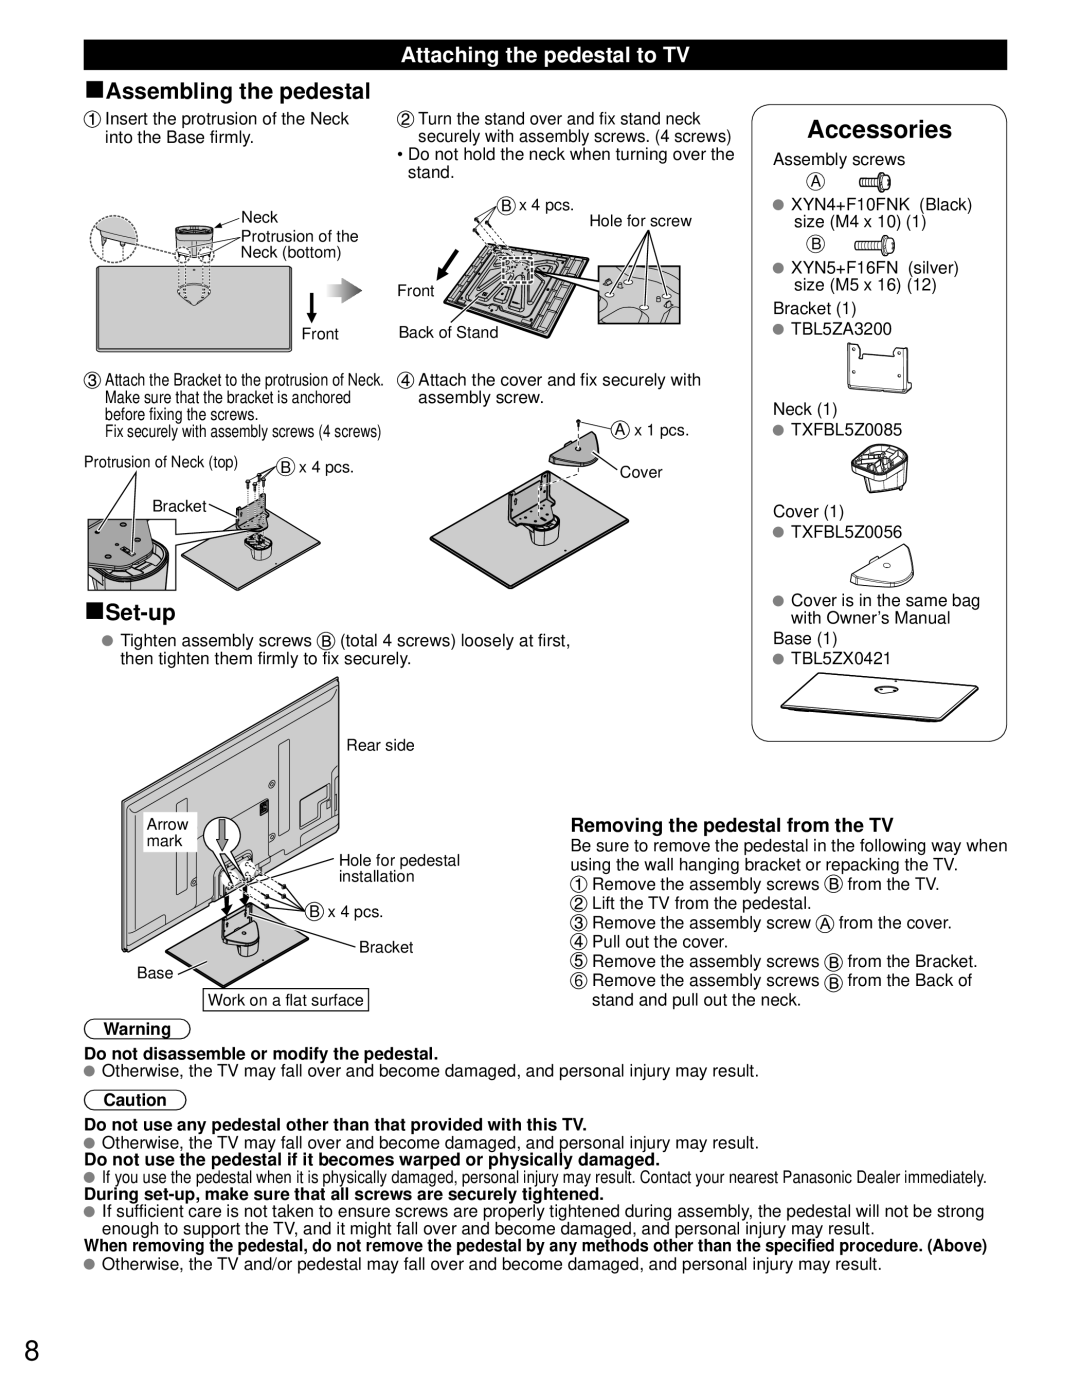 Panasonic TC-P60U50 owner manual Assembling the pedestal, Set-up, Accessories, Attaching the pedestal to TV 